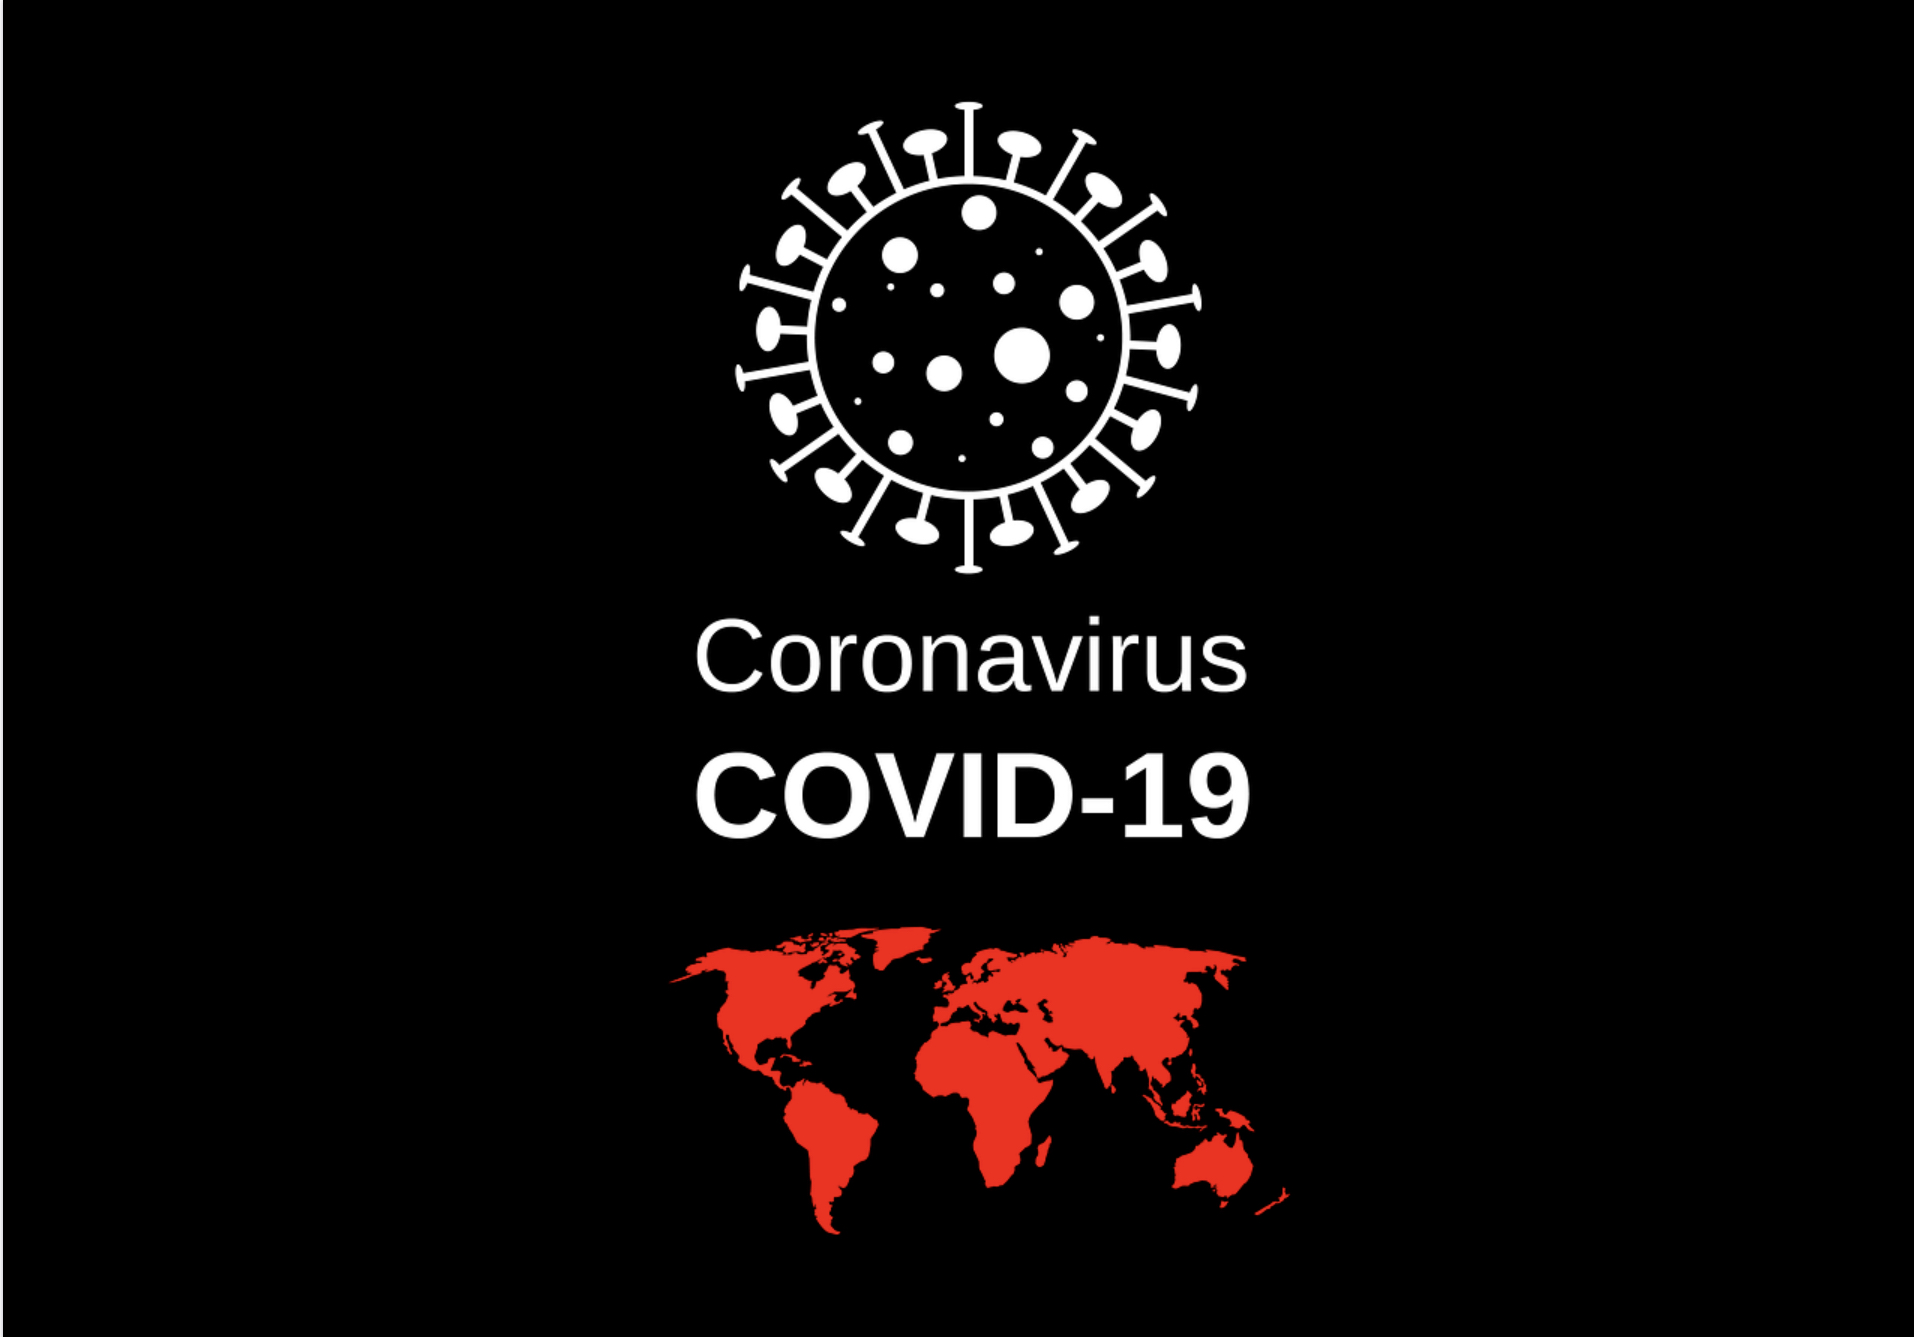 HEALTH DEPARTMENT ALERTS RESIDENTS OF ADDITIONAL POTENTIAL CORONAVIRUS (COVID-19) EXPOSURES